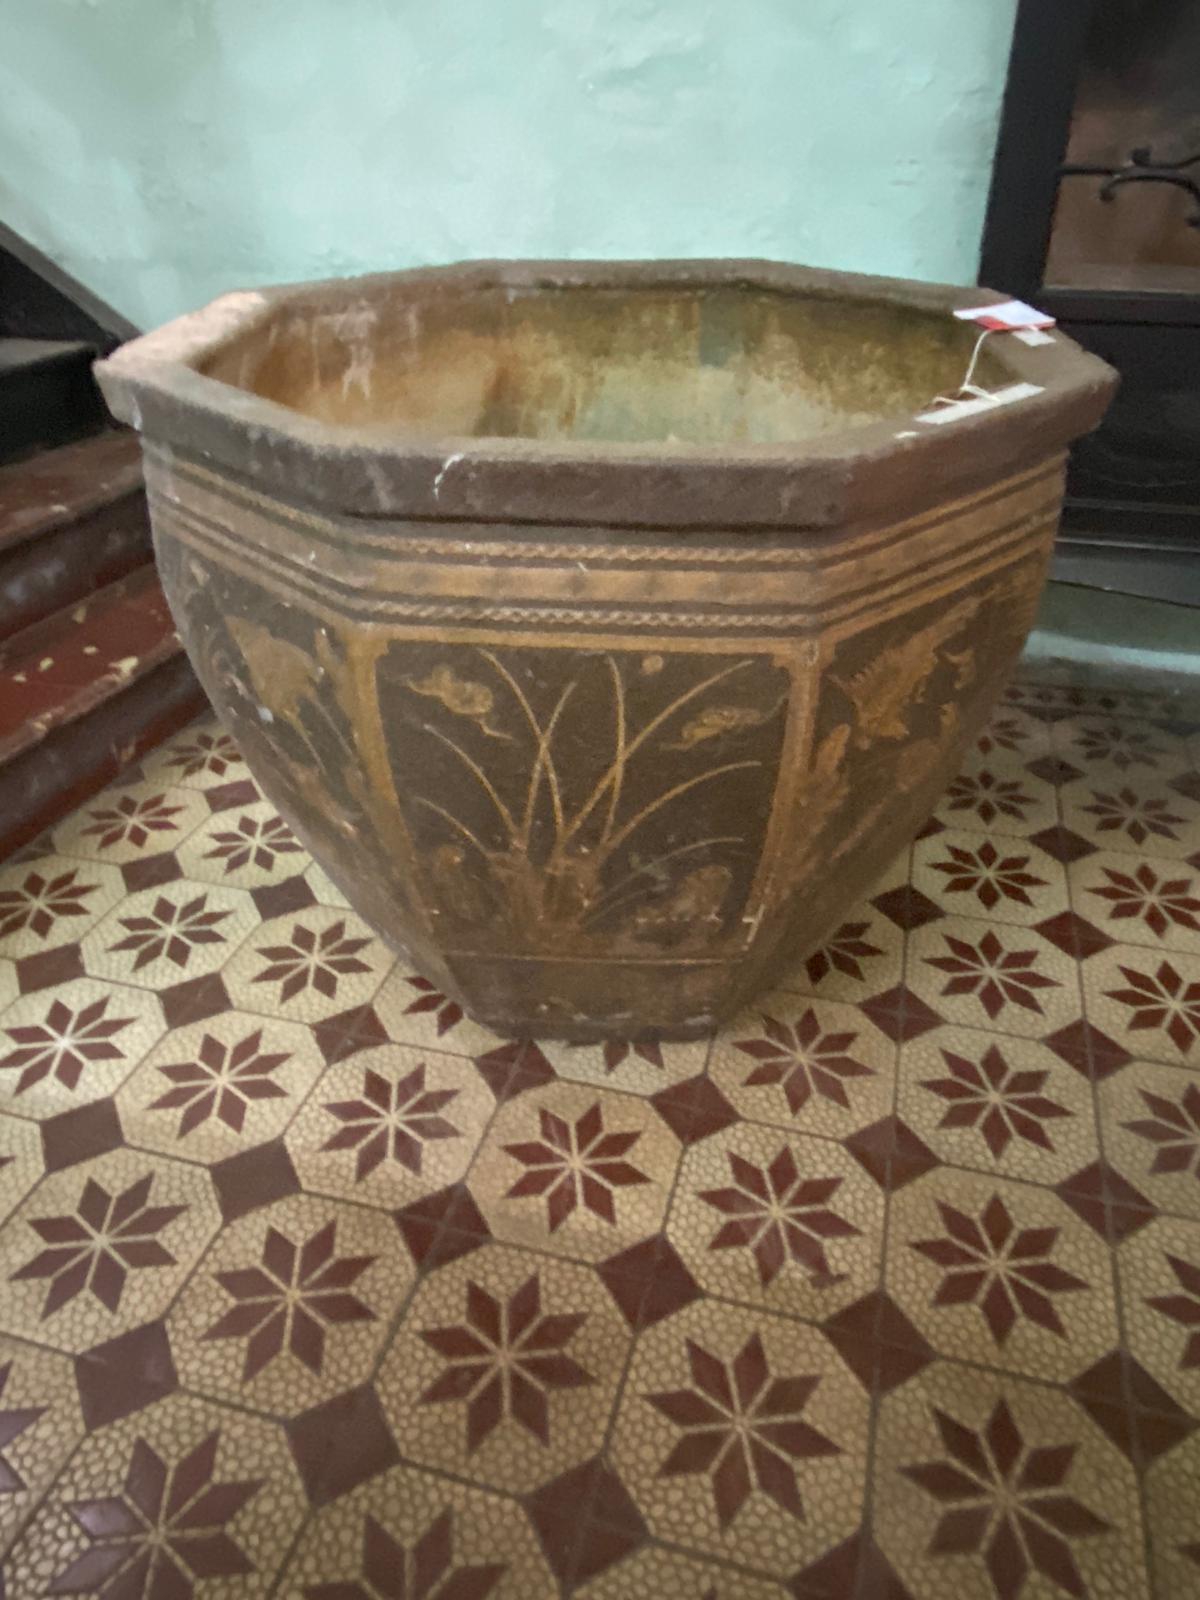 A LARGE HEXAGONAL BROWN GLAZED JARDINIERE - Image 12 of 12